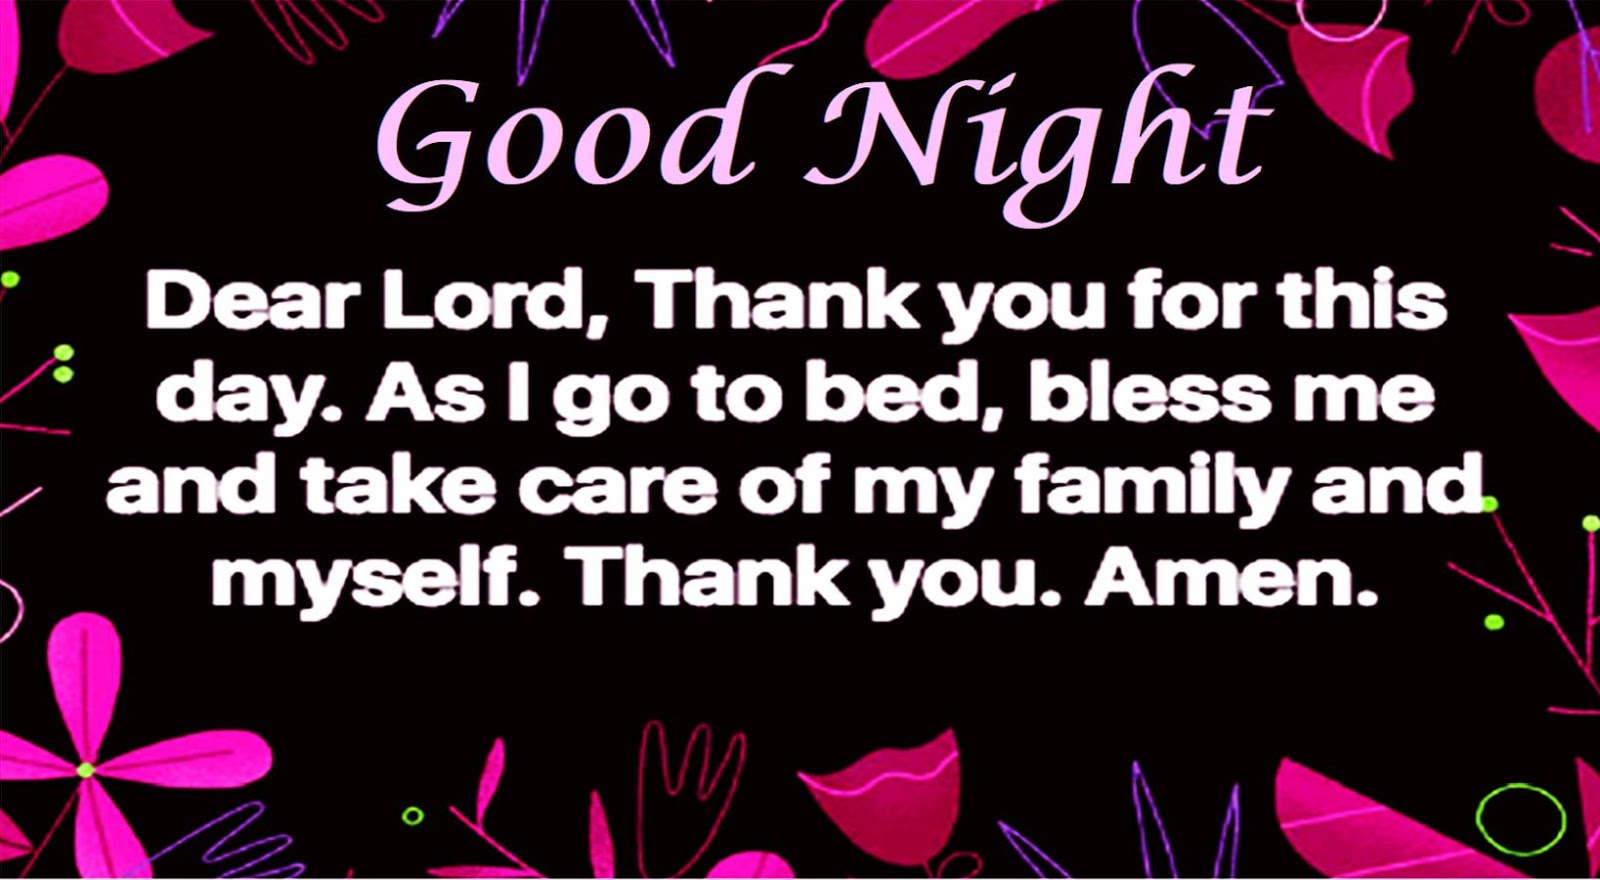 Lord, tonight, take care of me and my loved ones! Amen.